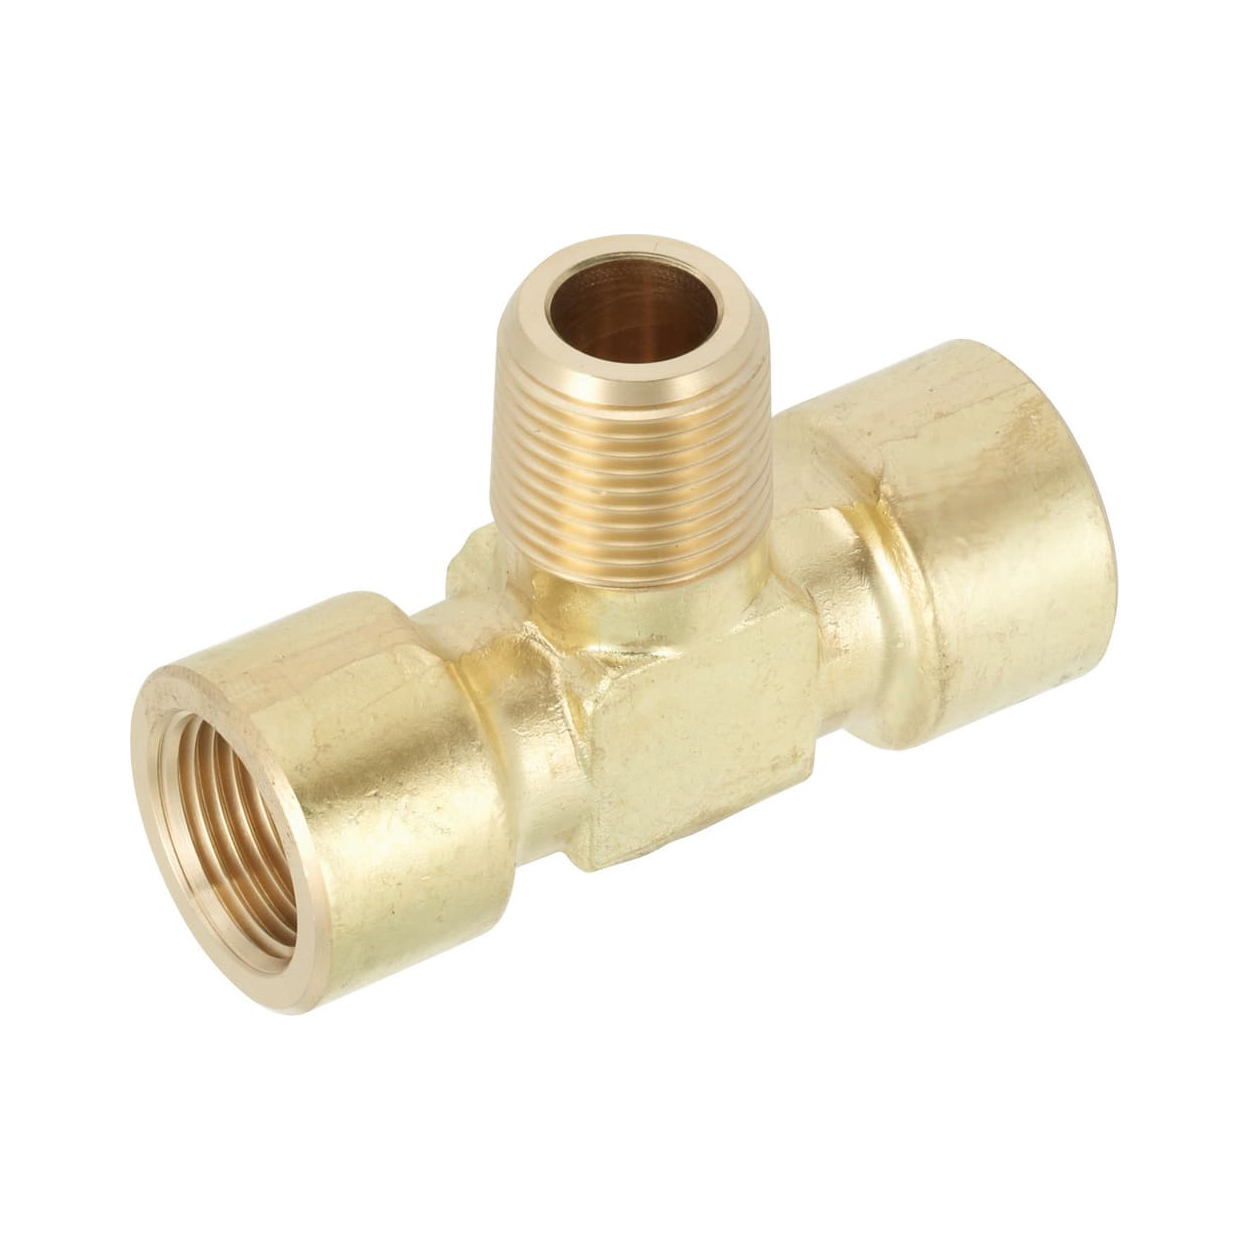 Brass Fittings for Steel Pipe/Tee/Threaded/Tapped SJSXT8A